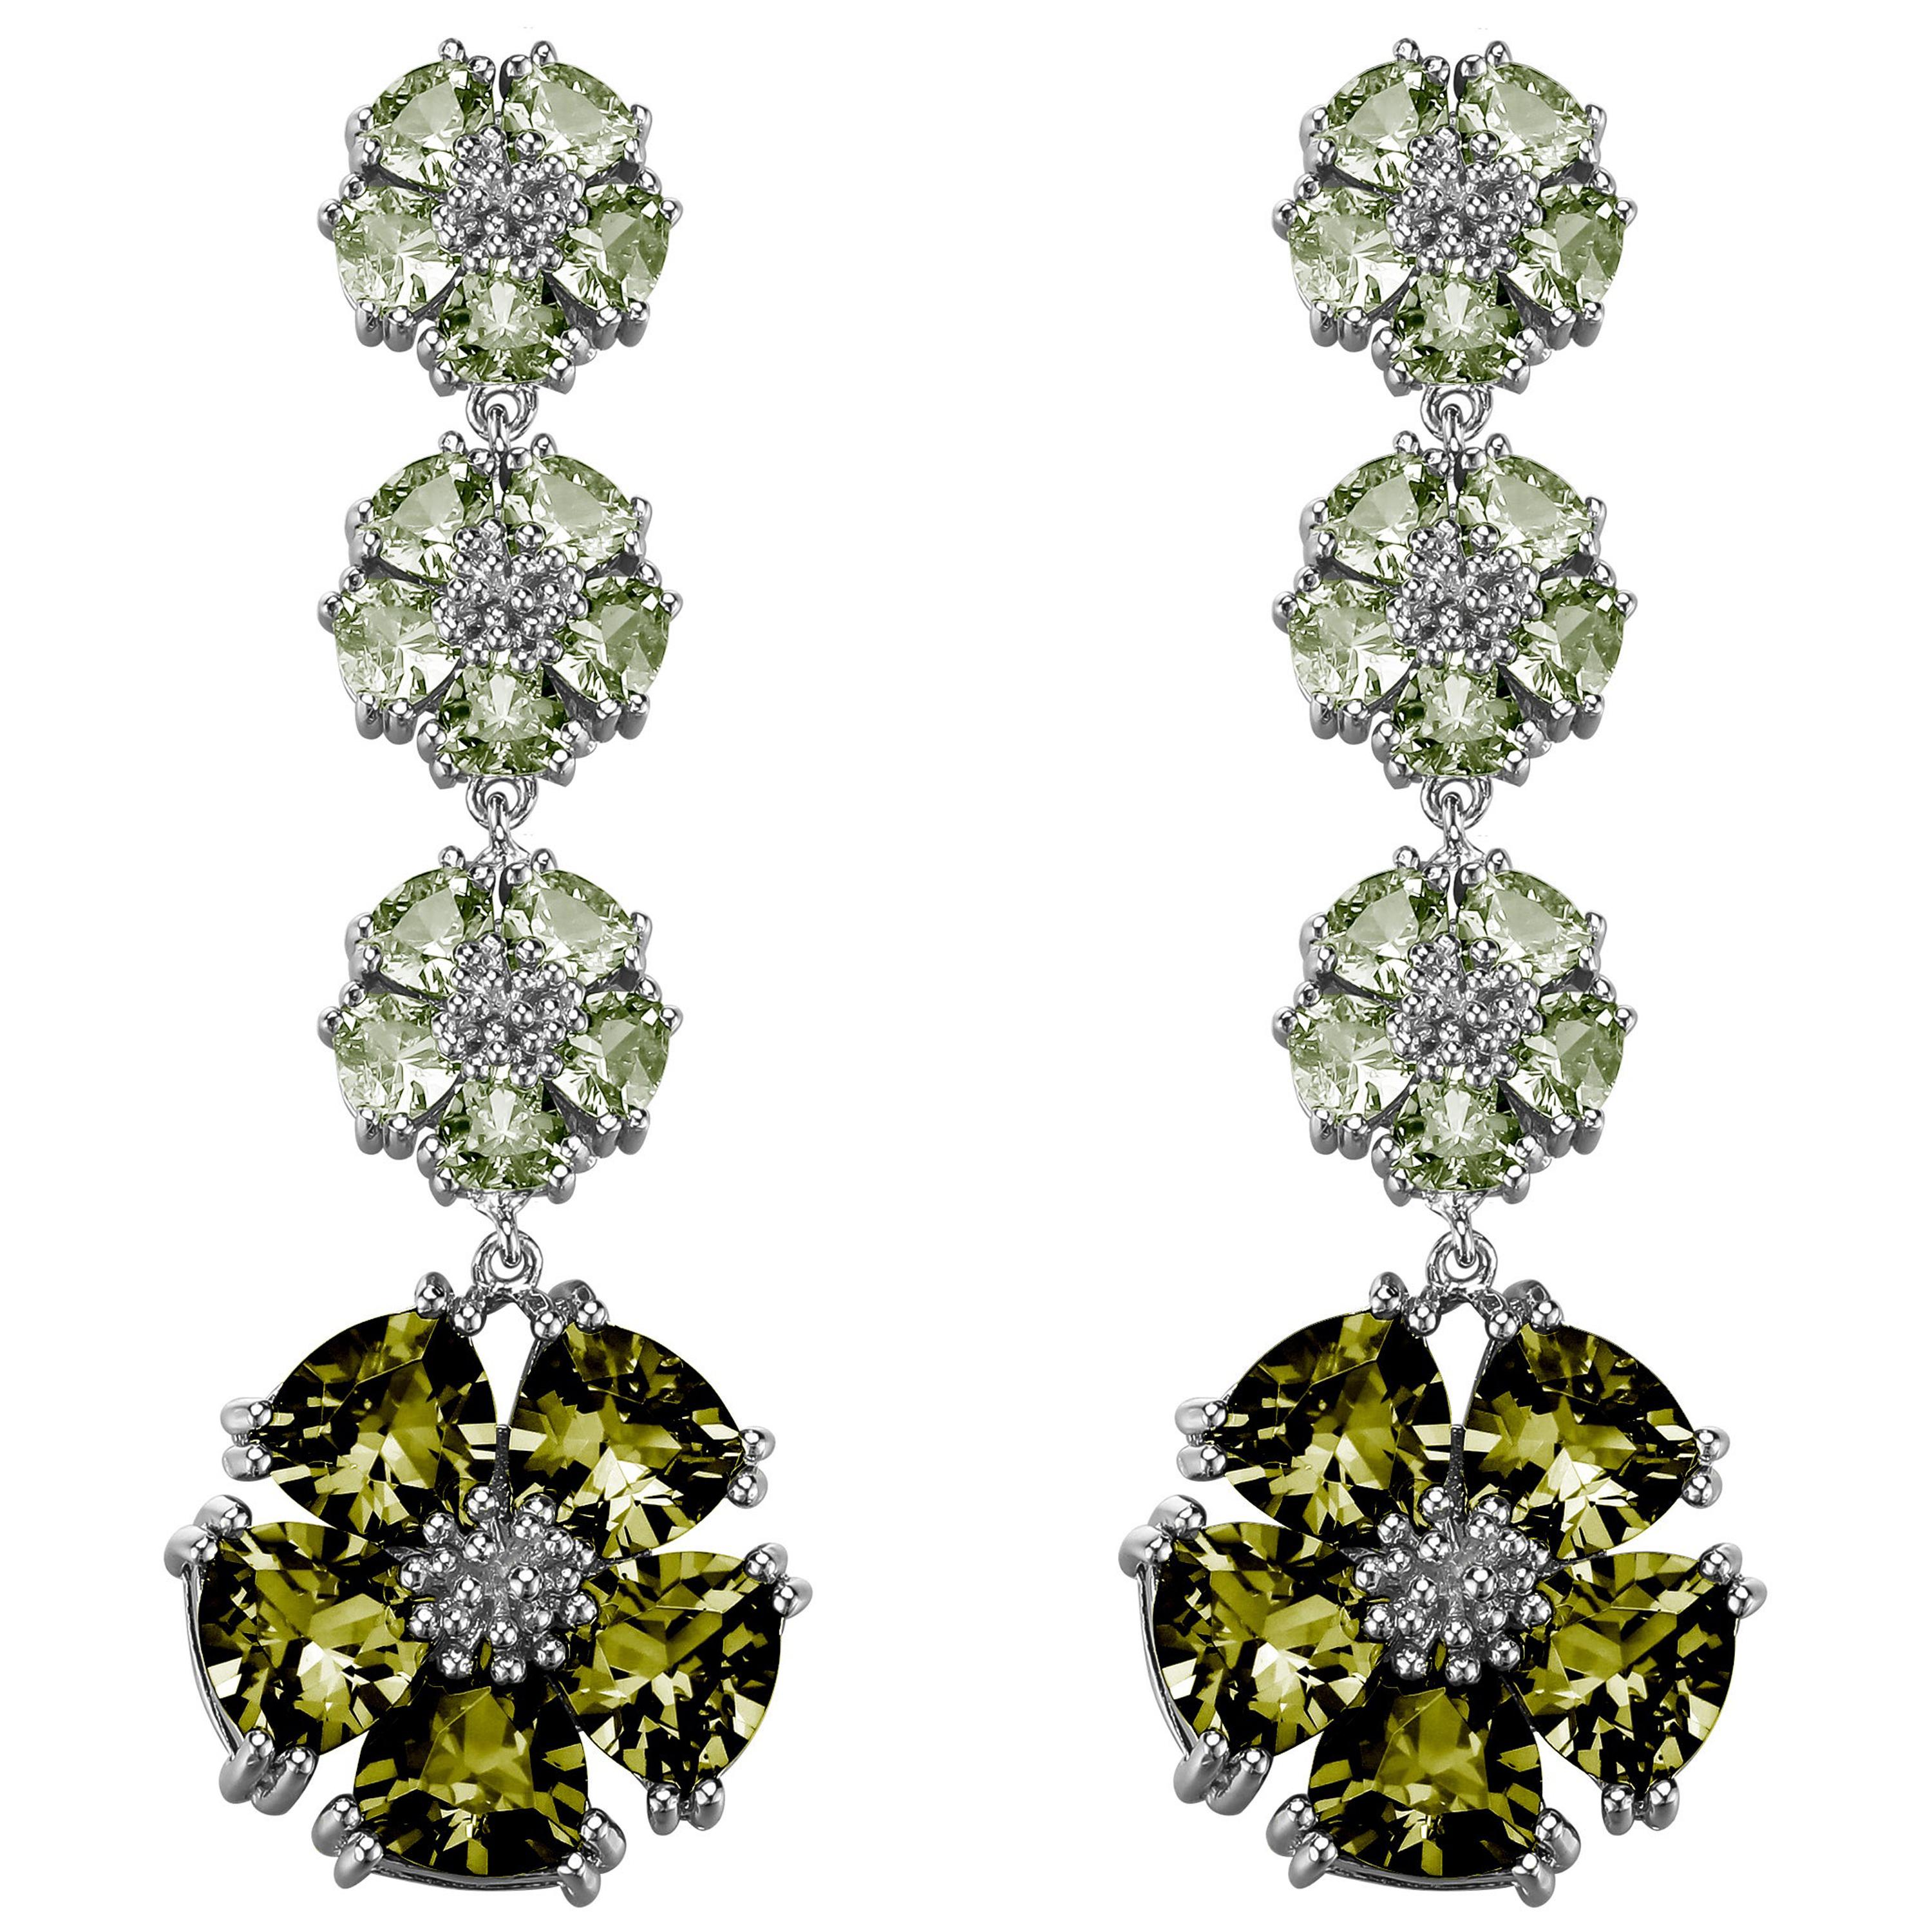 Light and Olive Green Amethyst Blossom Renaissance Drop Earrings